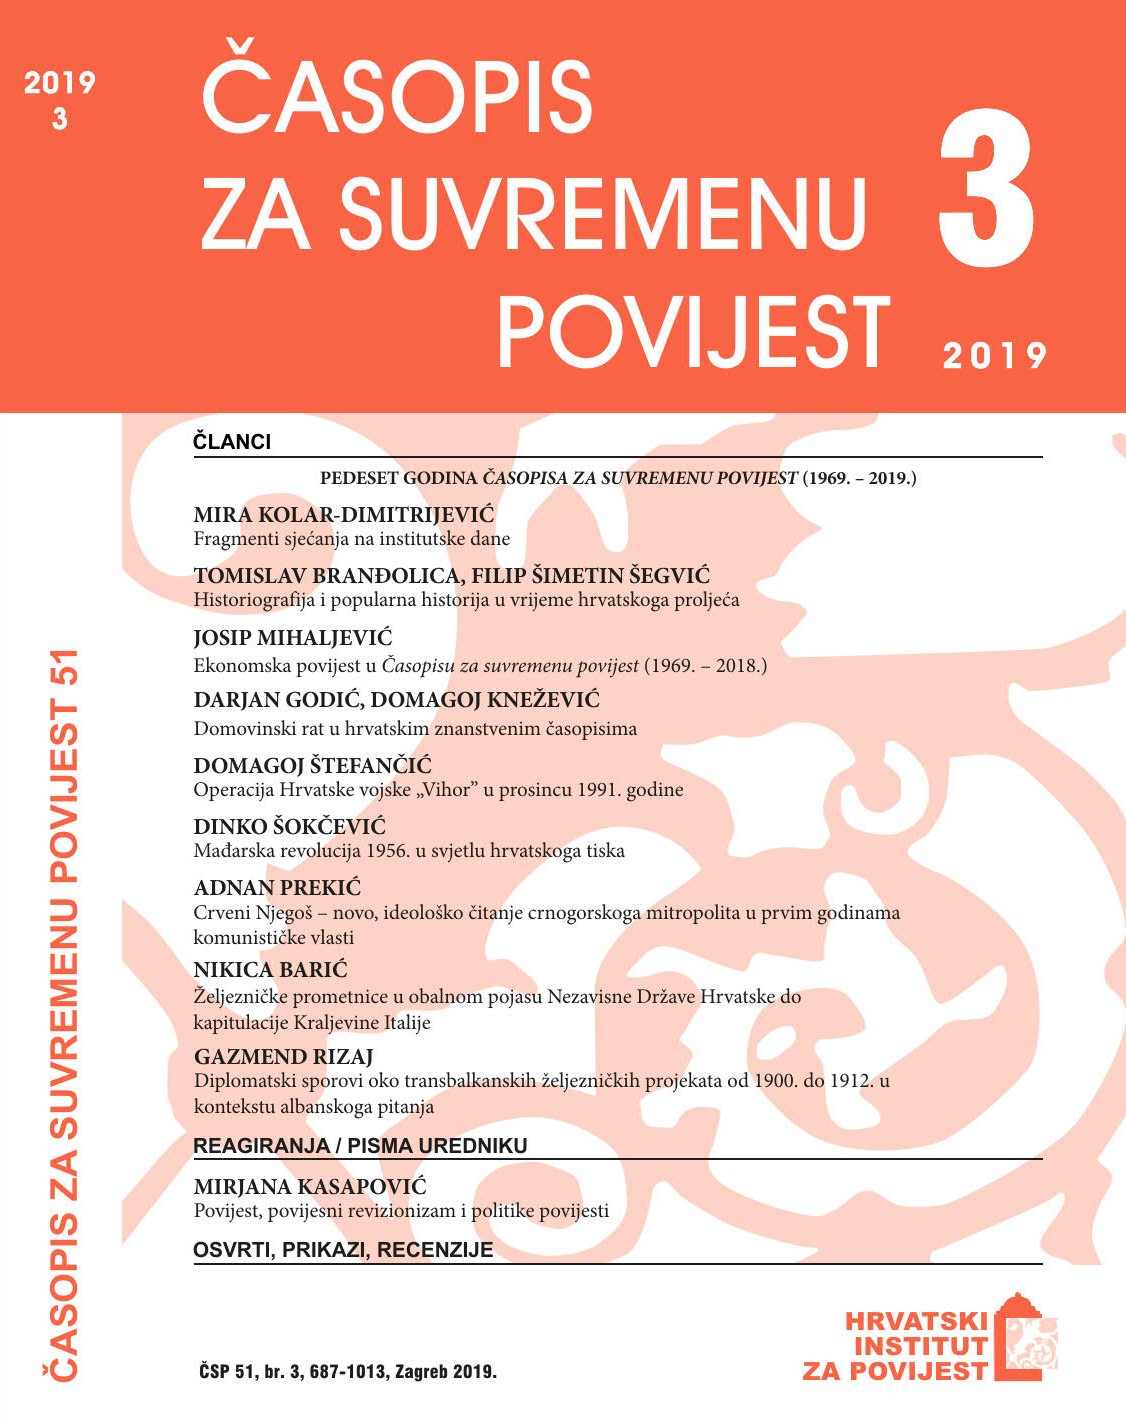 Historiography and Popular History at the Time of the Croatian Spring Cover Image